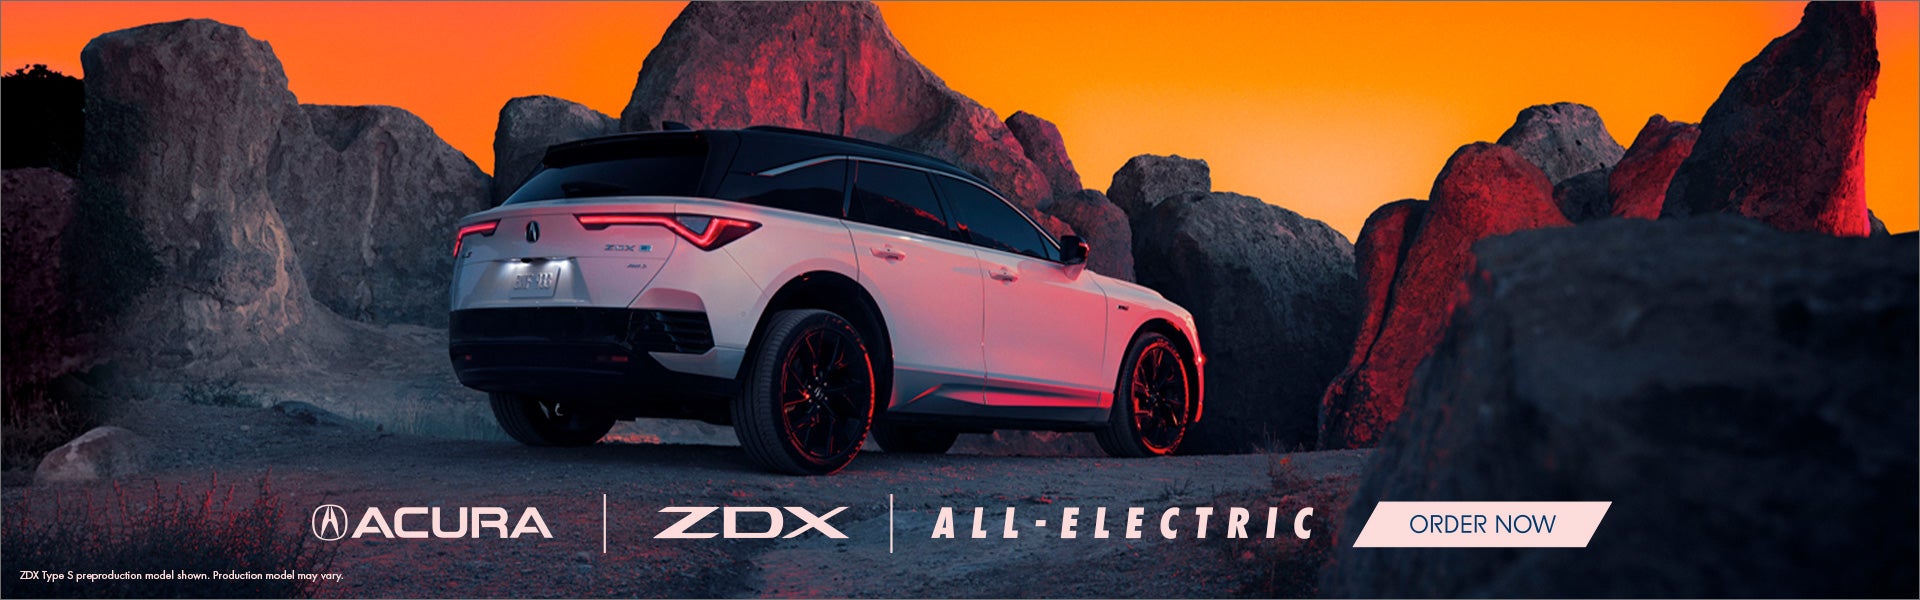 All-Electric ZDX banner